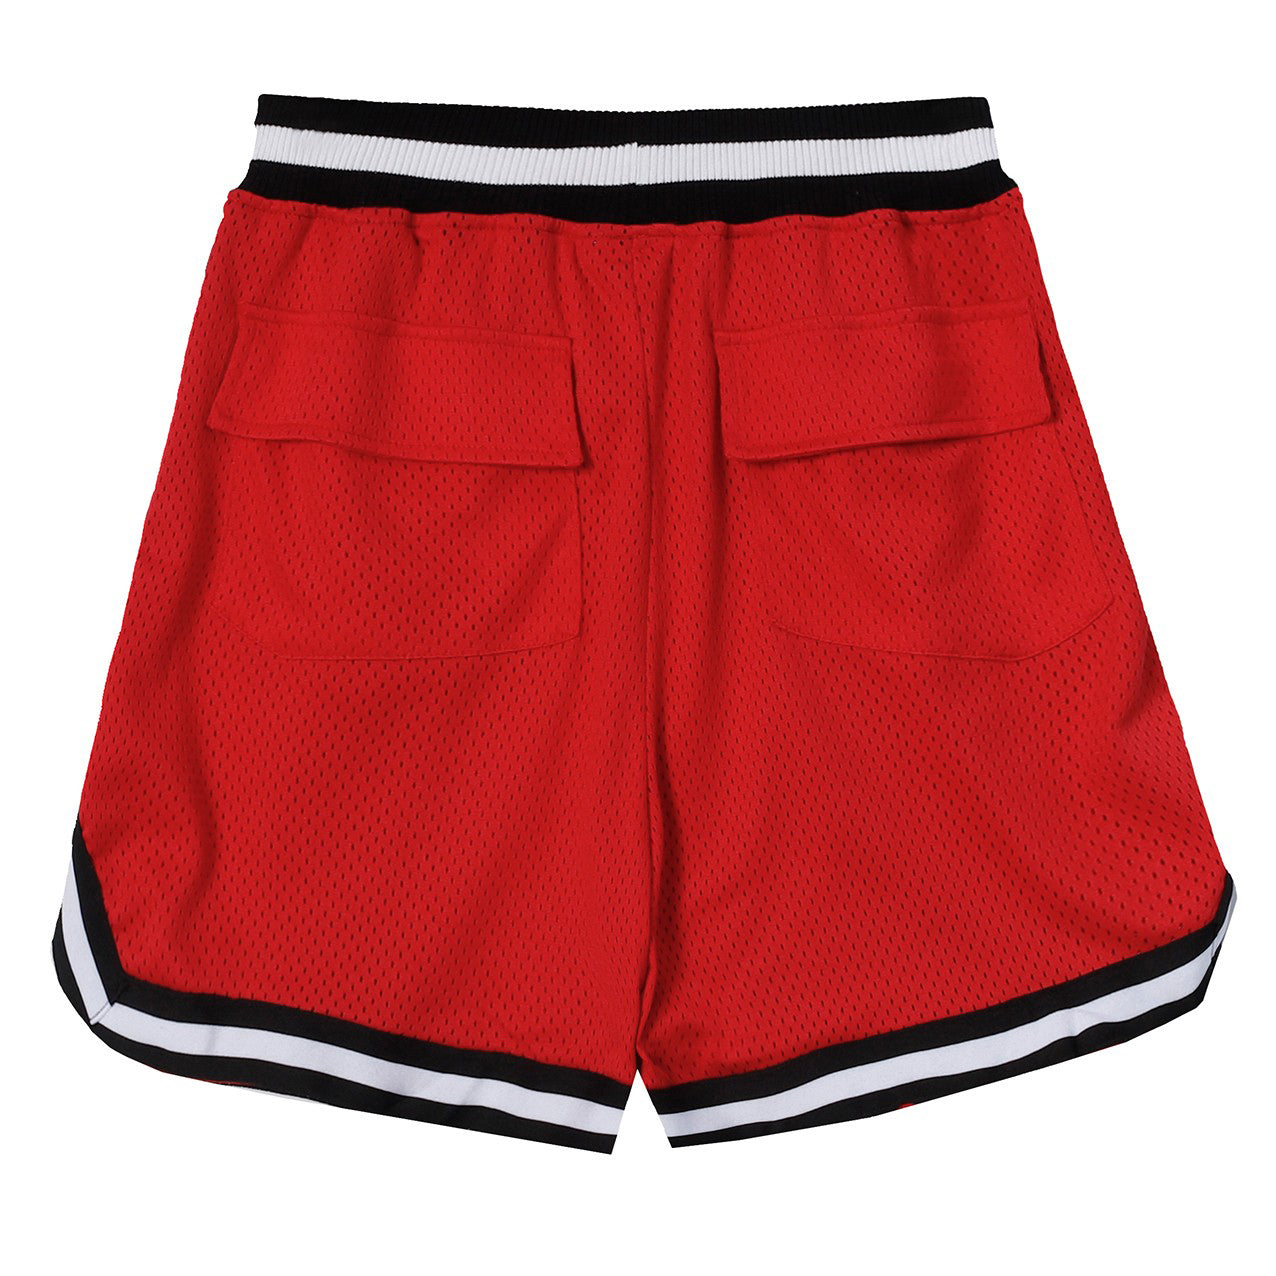 RHUDE summer high quality double layer breathable shorts